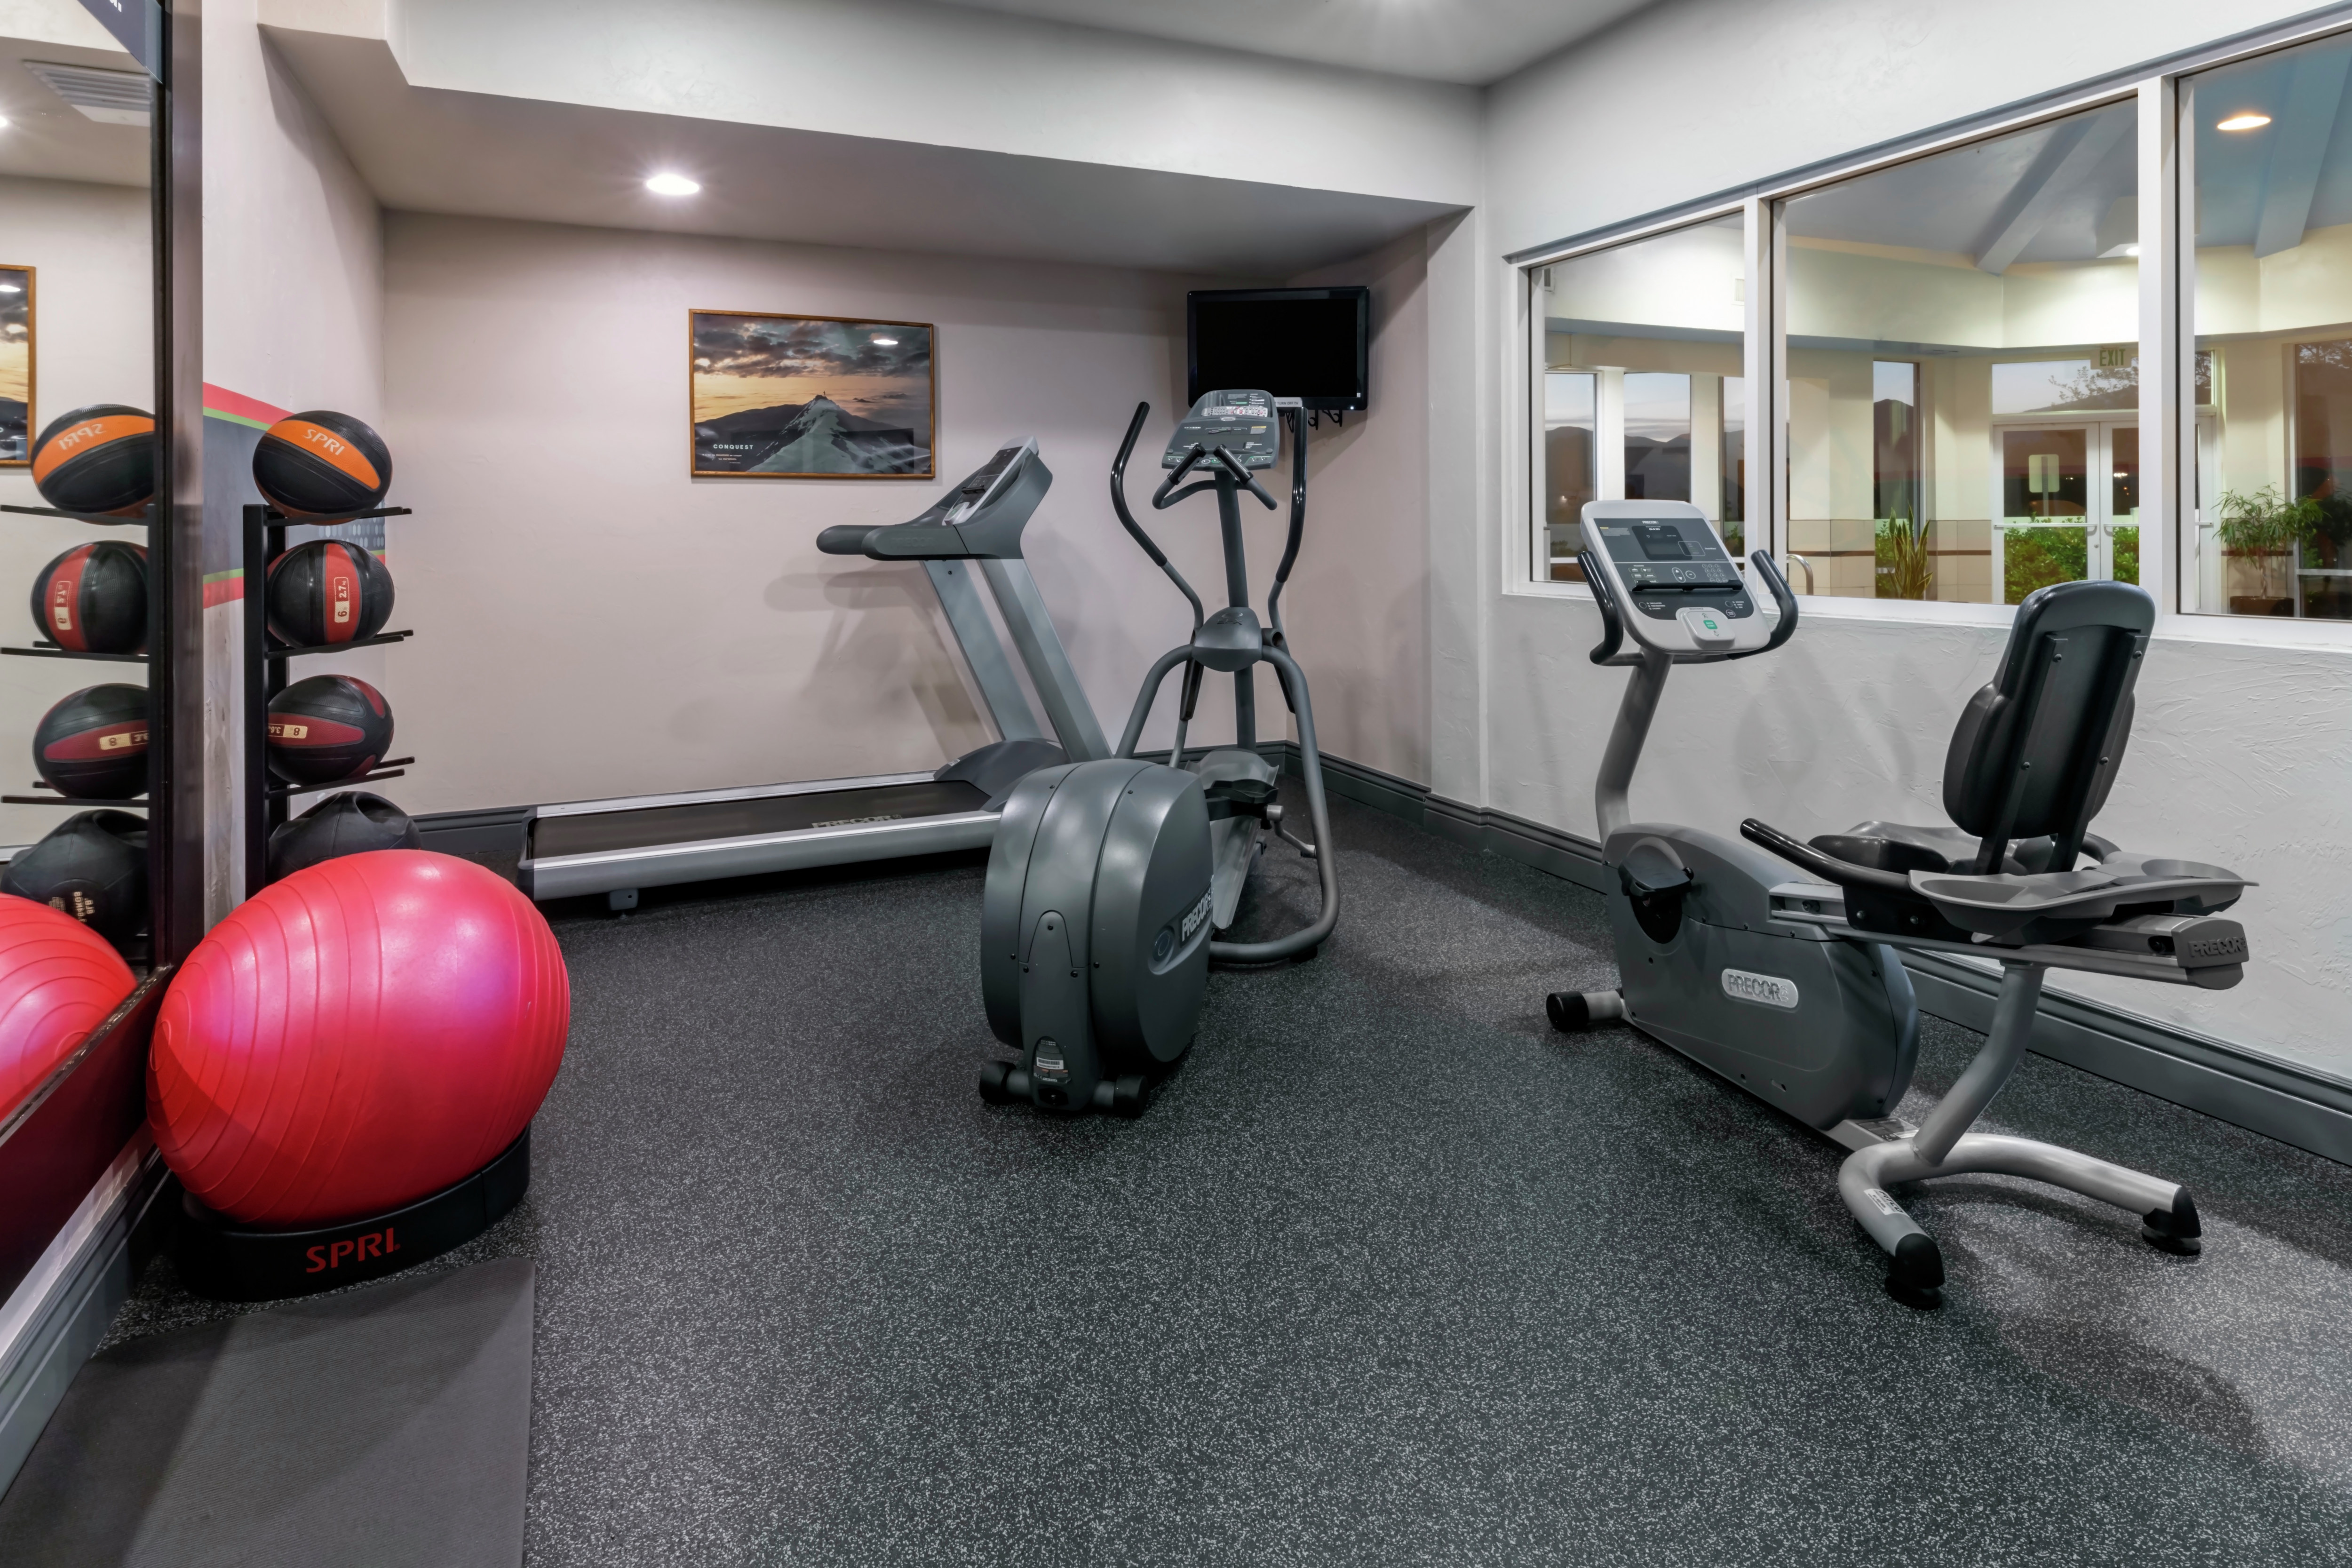 Recreational Room with Workout Equipment